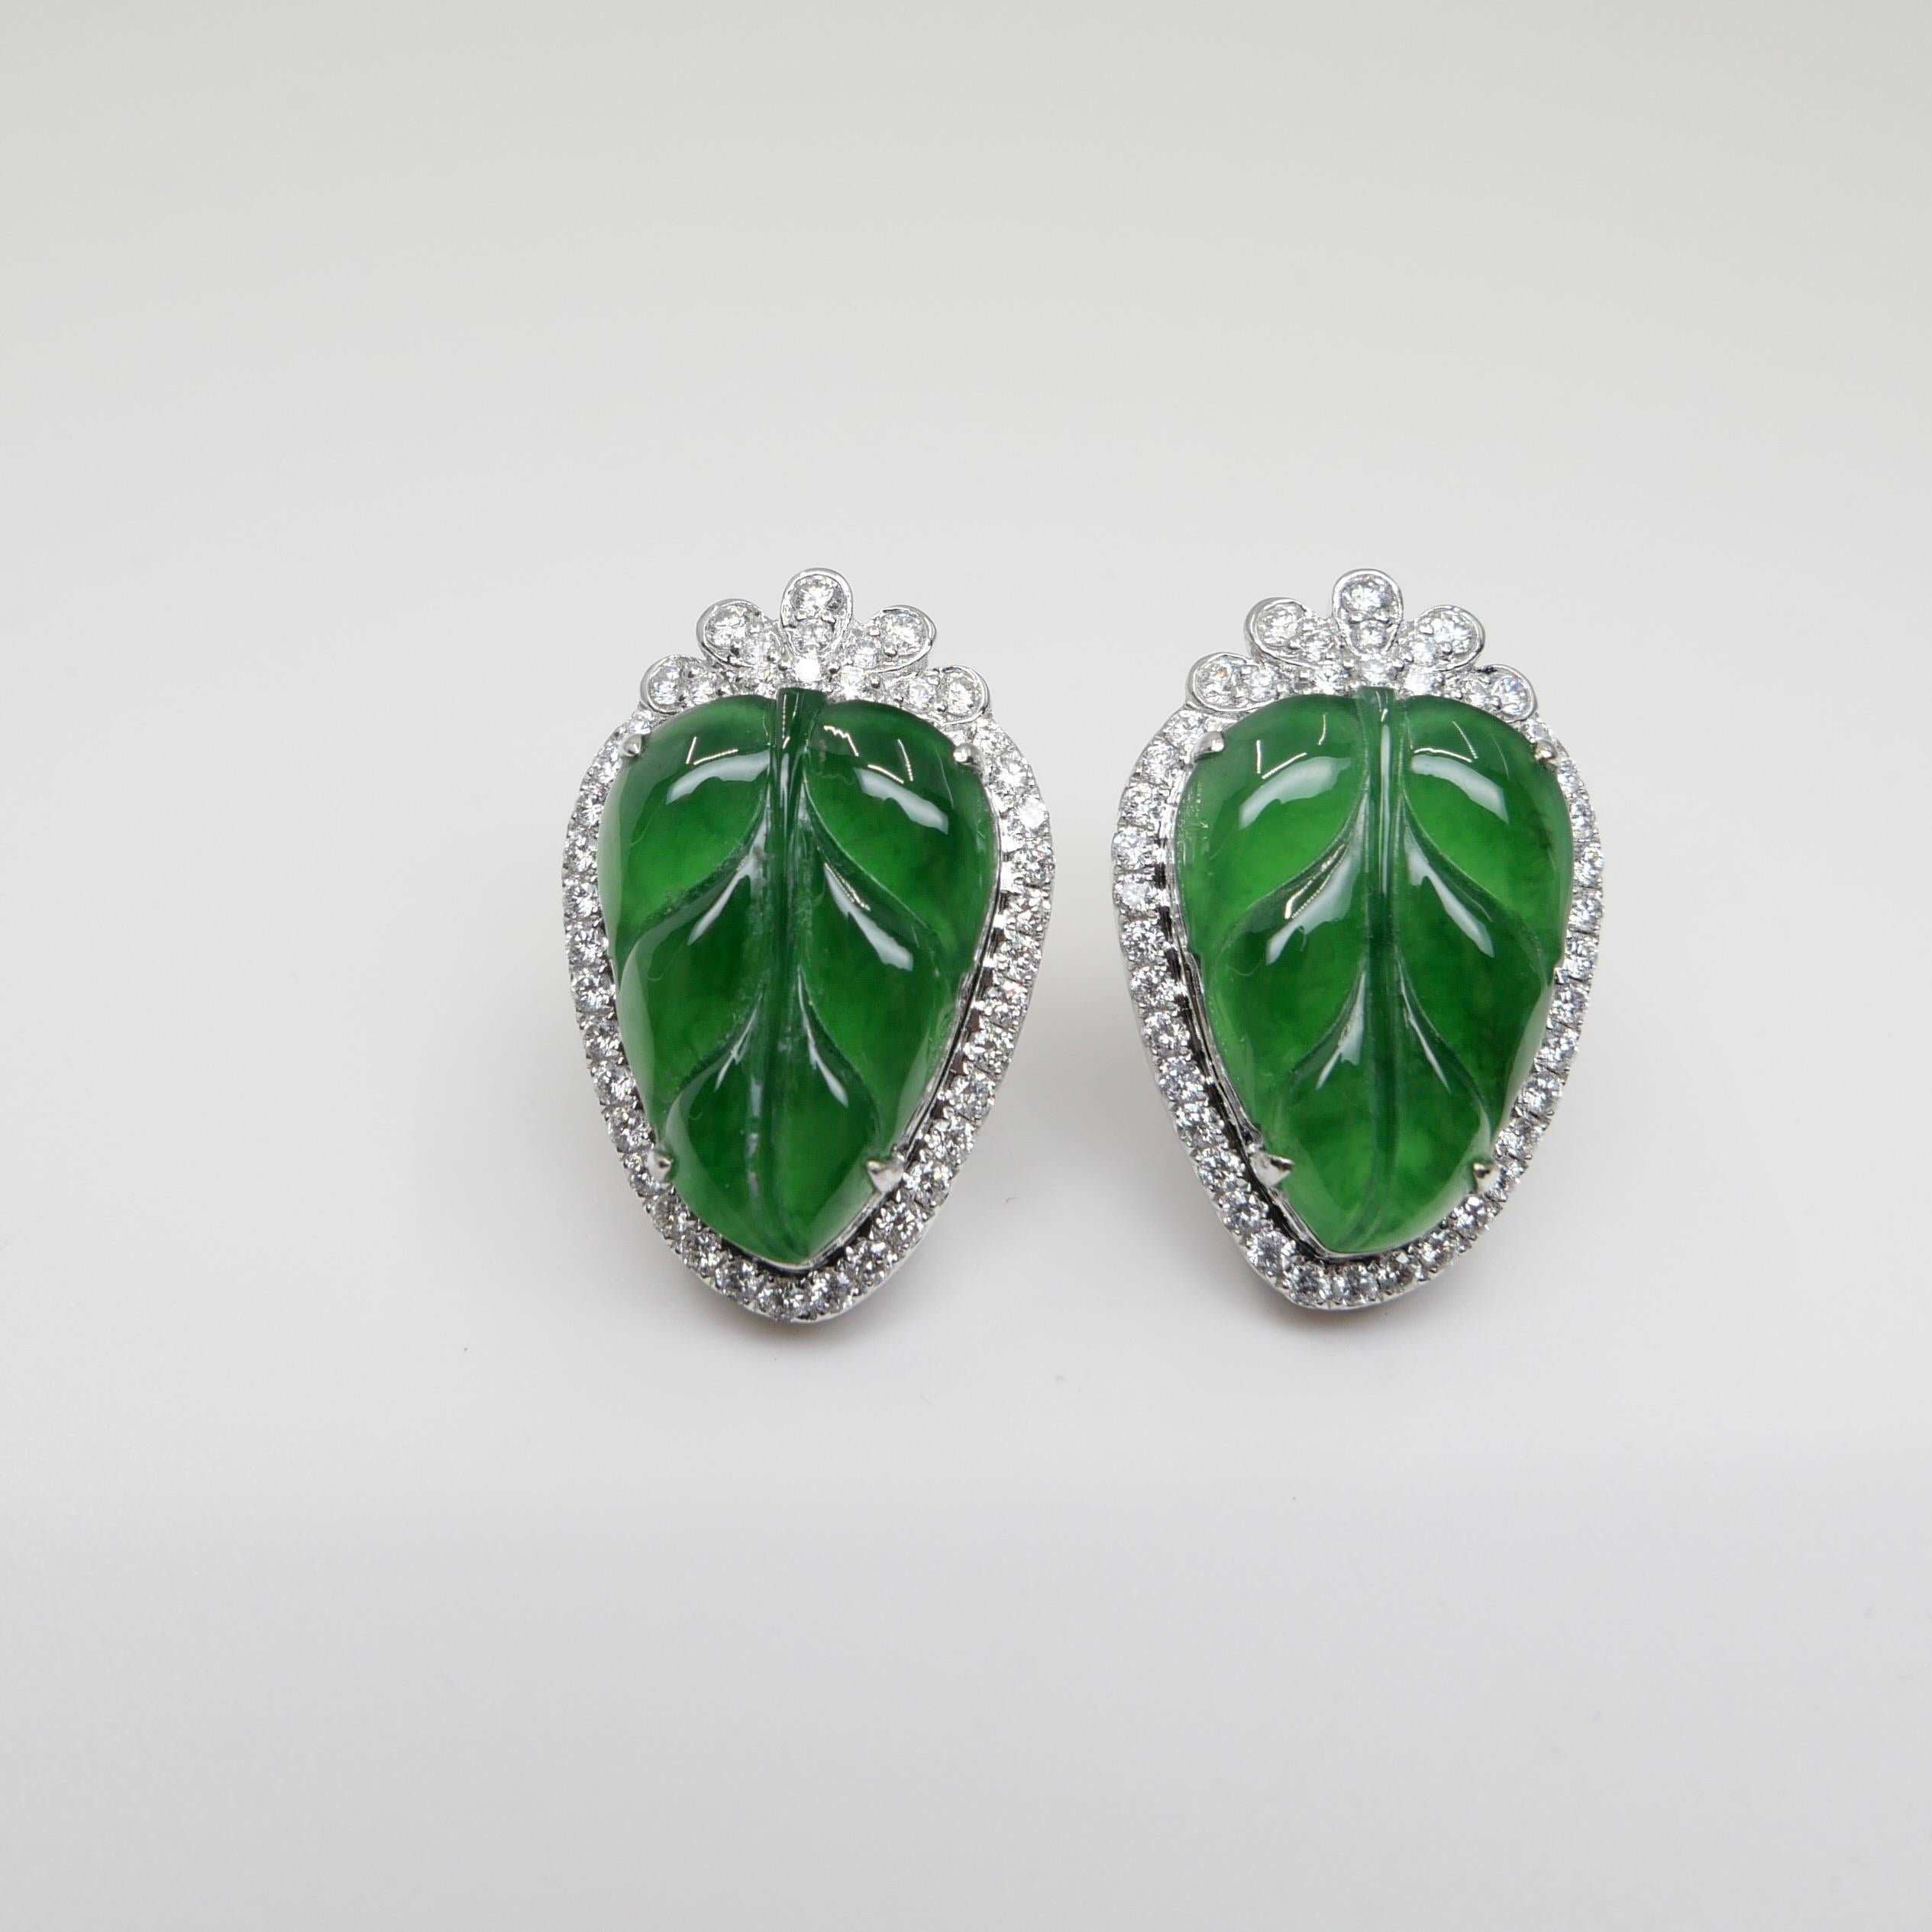 Certified Icy Imperial Green Jade and Diamond Earrings, Collector's Quality For Sale 2